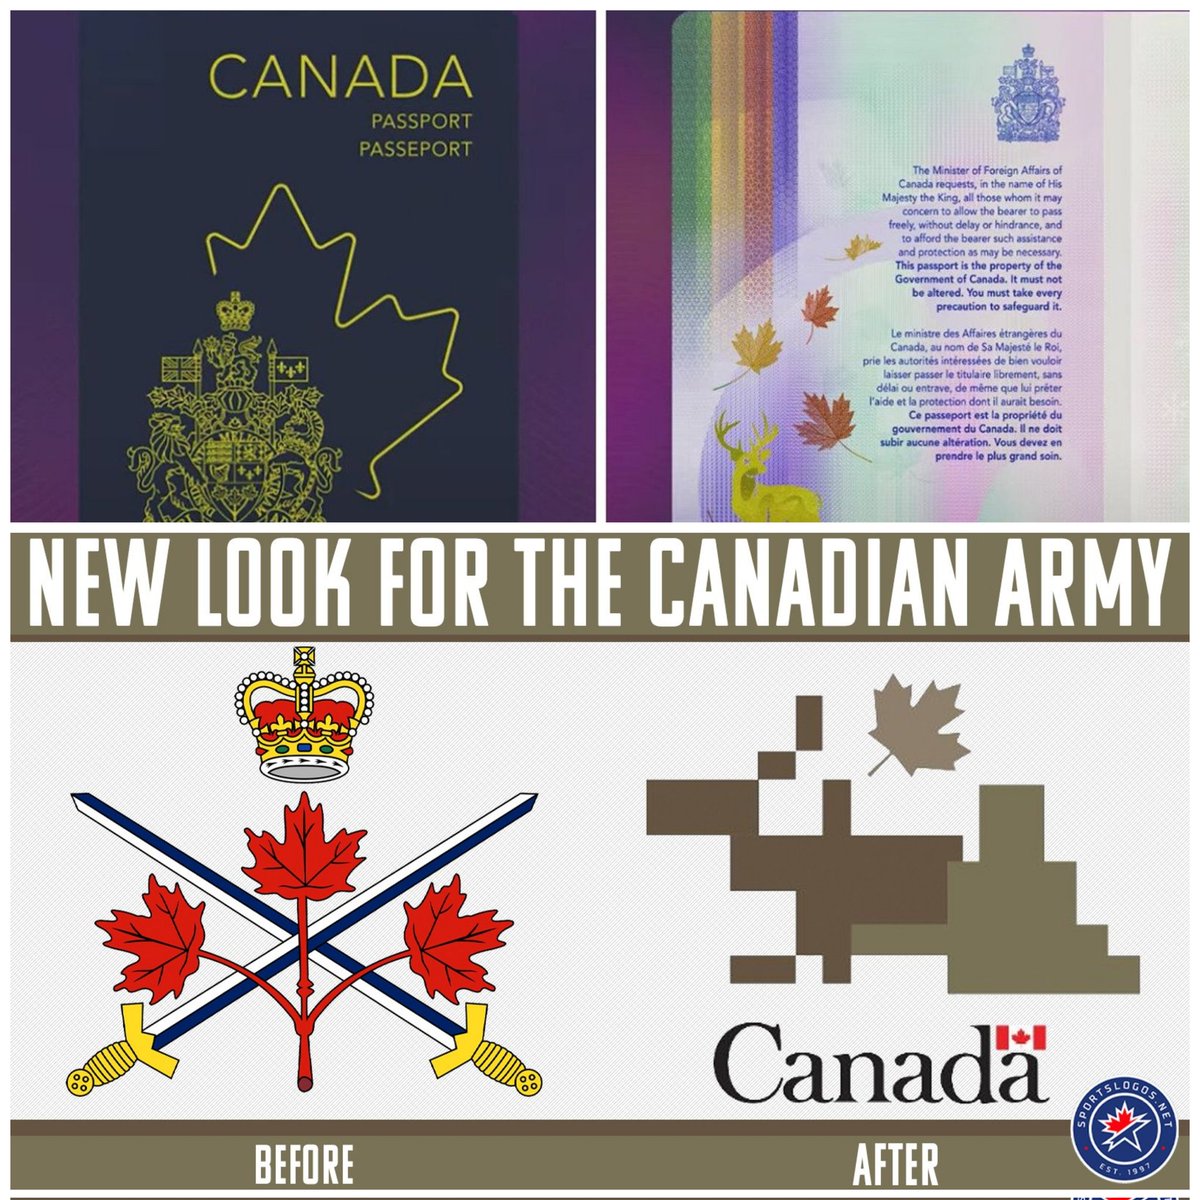 First they ruined our passports with the PRIDE rainbow And now they have changed our military logo into some weird MINECRAFT nonsense Everything the Trudeau government touches turns to sh*t